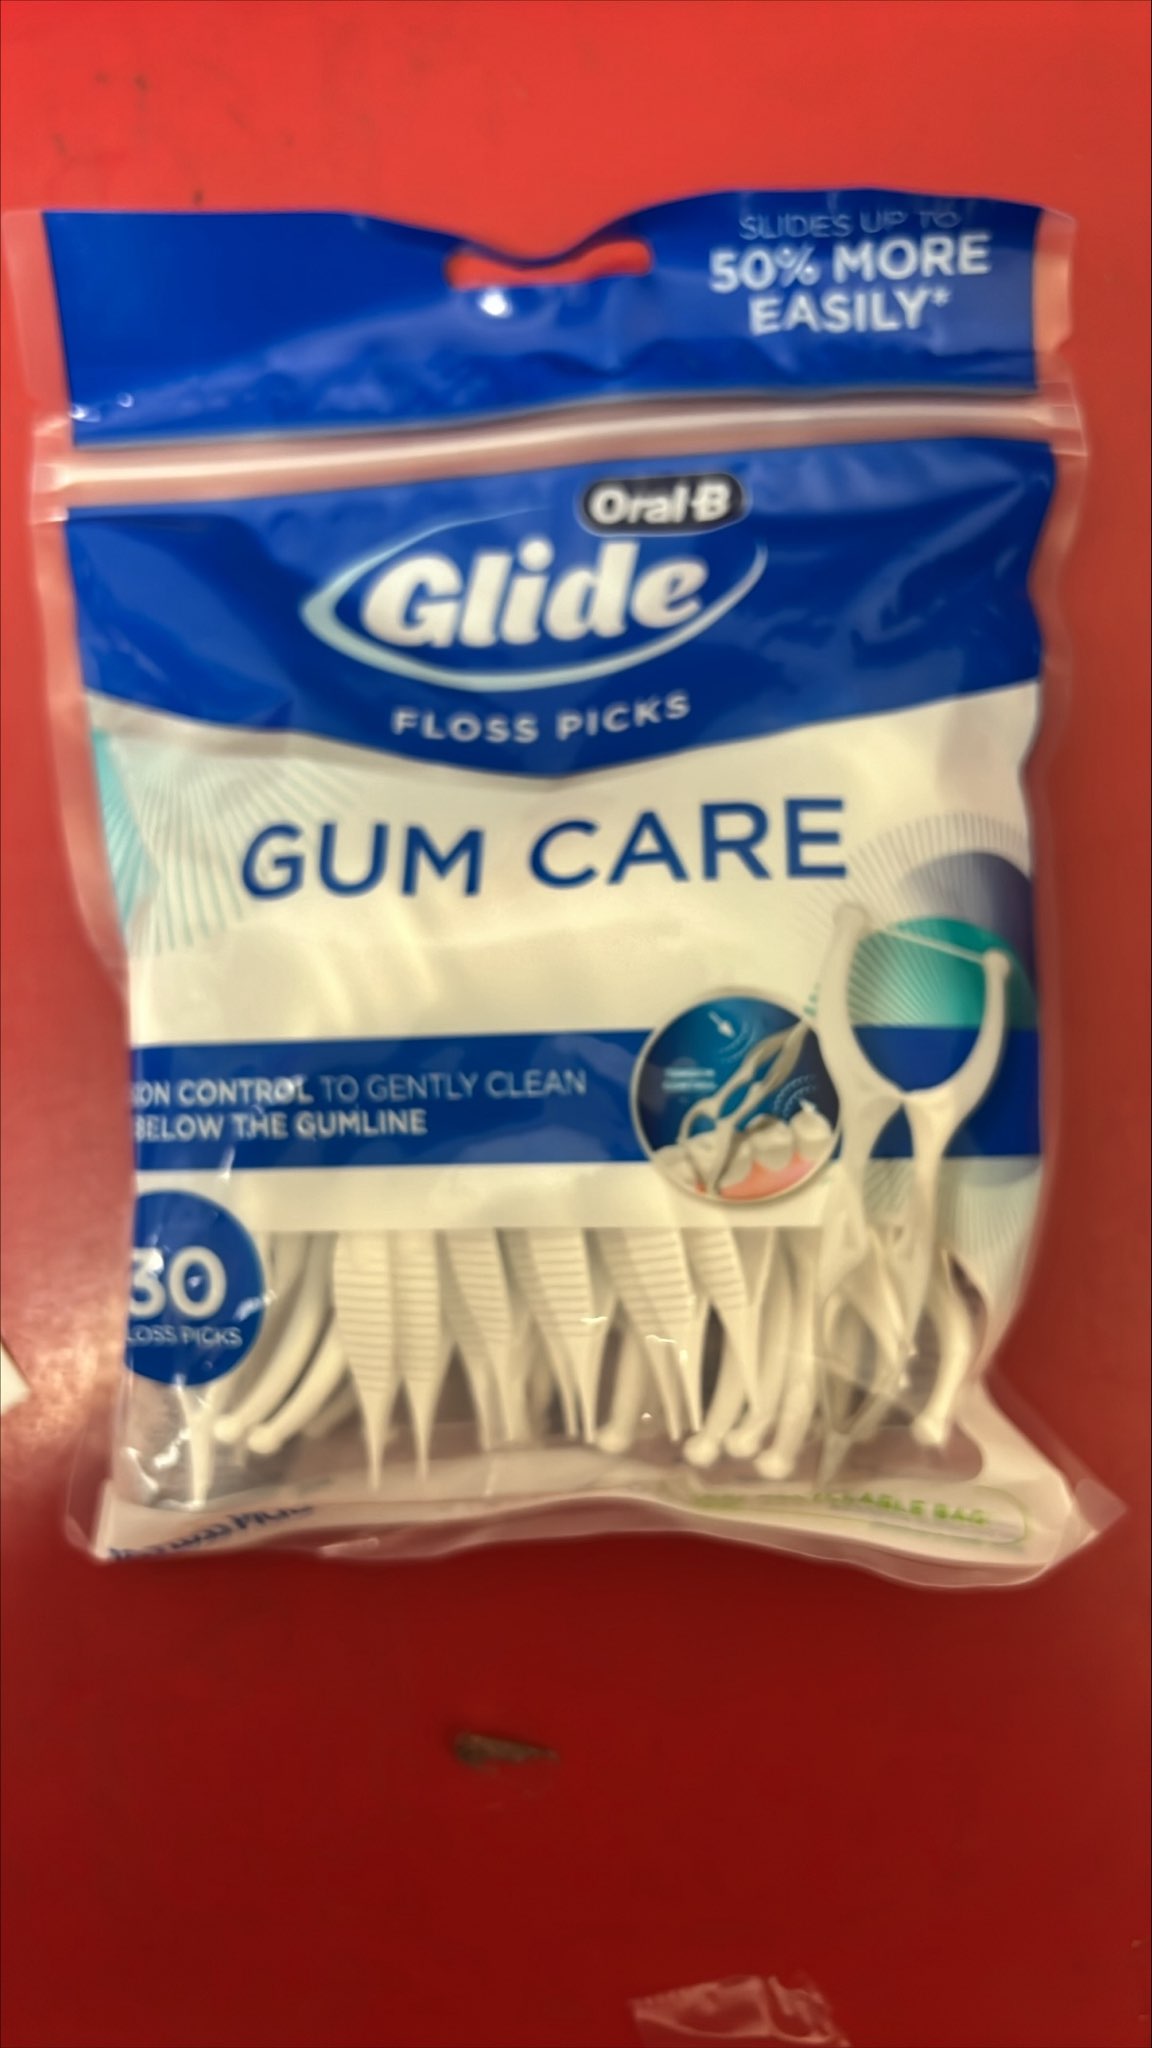 Glide Pro-Health Gum Care Floss Picks 30ct By Procter & Gamble Dist Co USA 